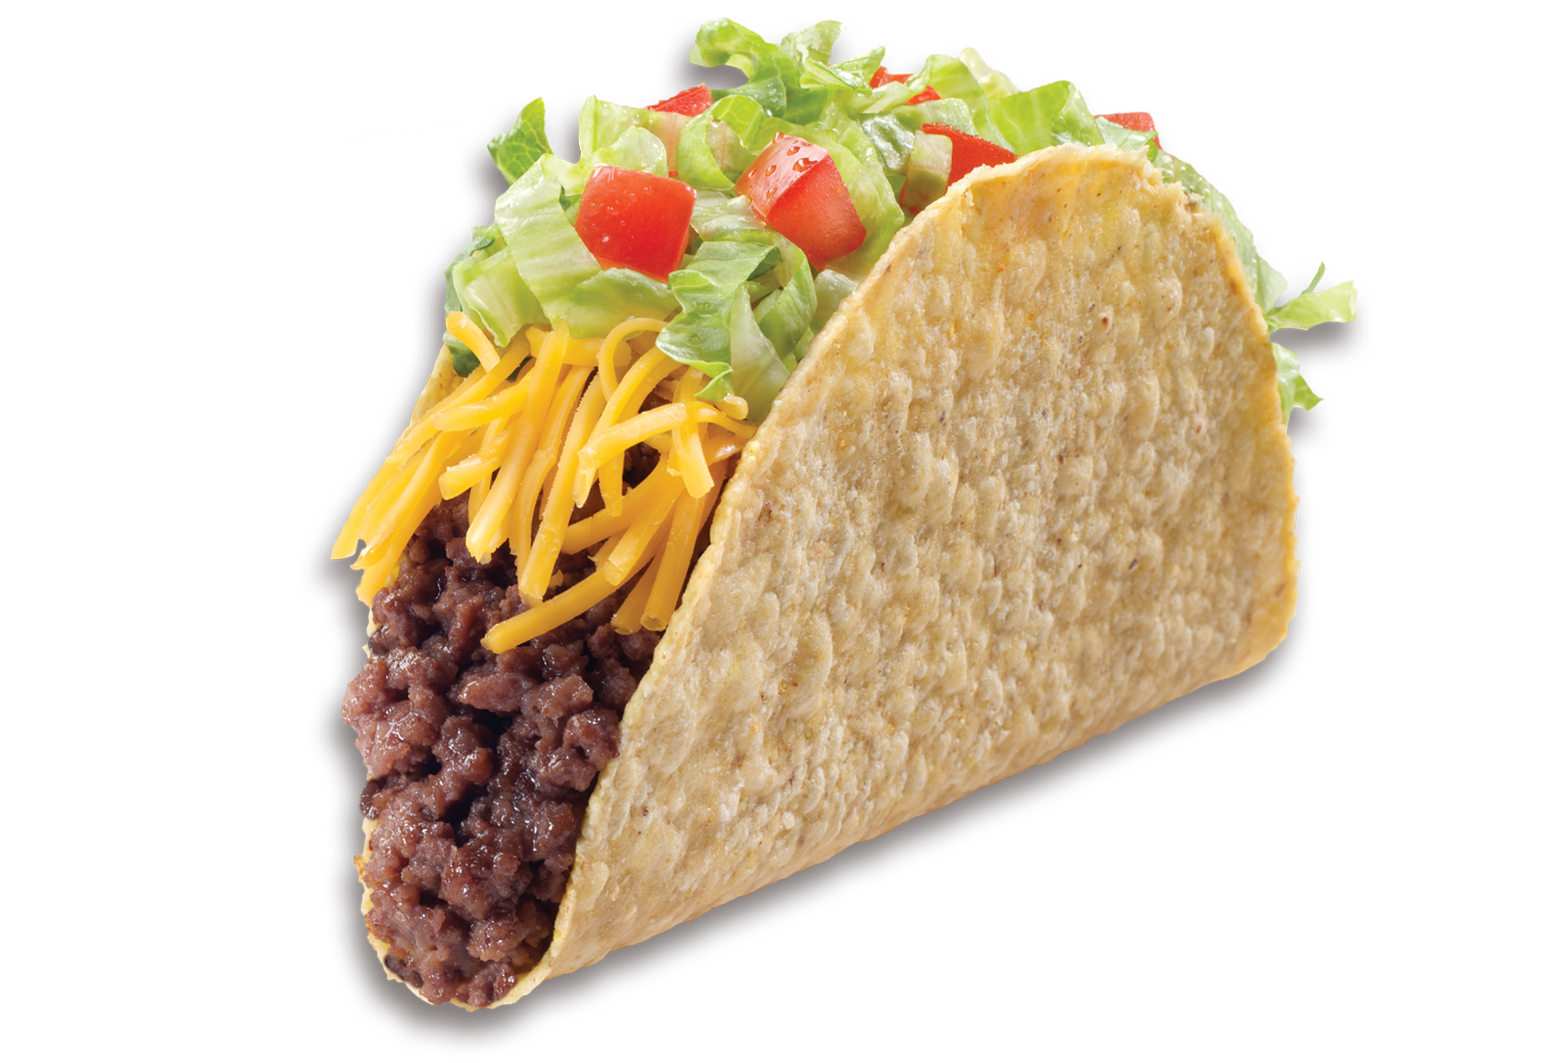 HQ Taco Wallpapers | File 1344.37Kb